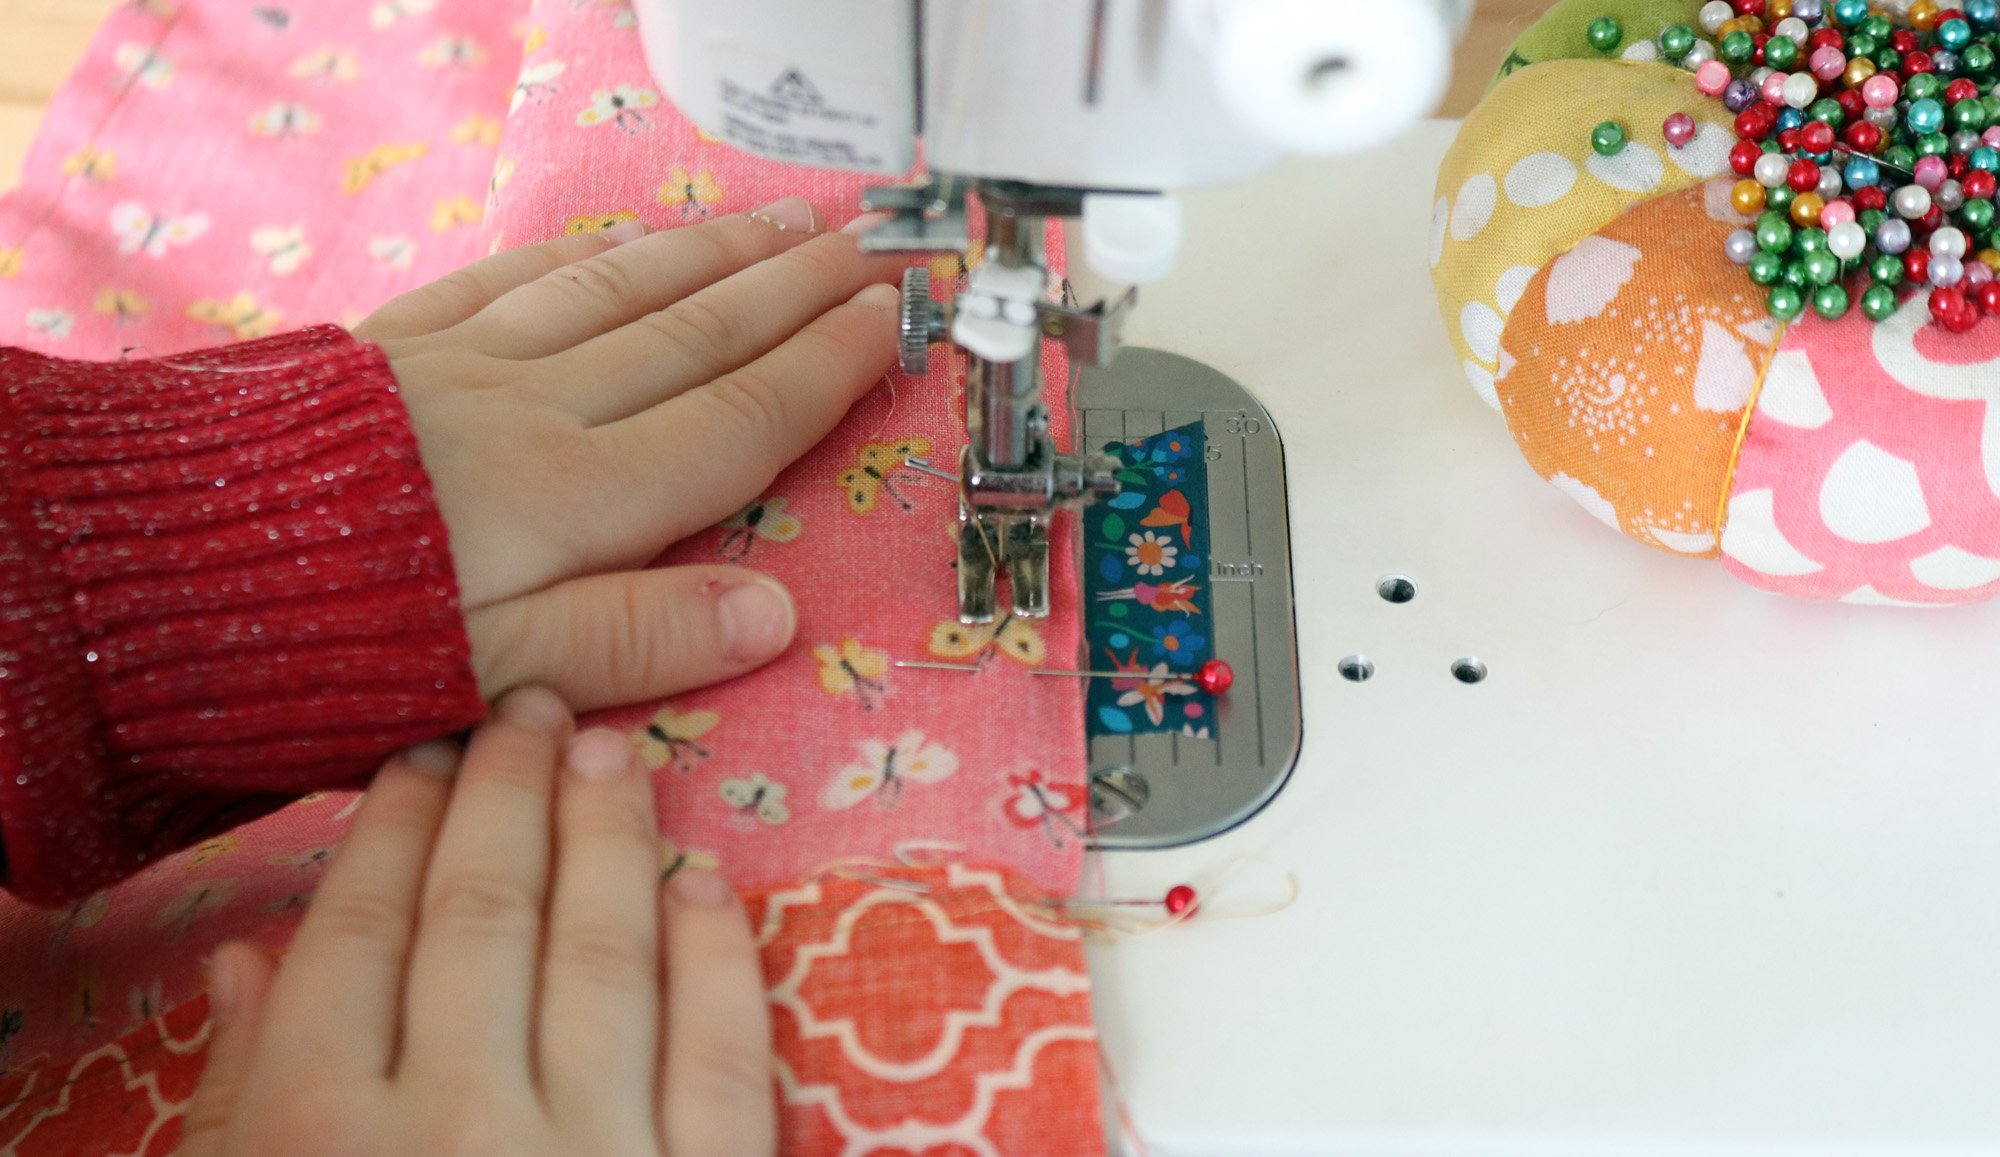 First Sewing Projects- get started sewing with Easy Projects